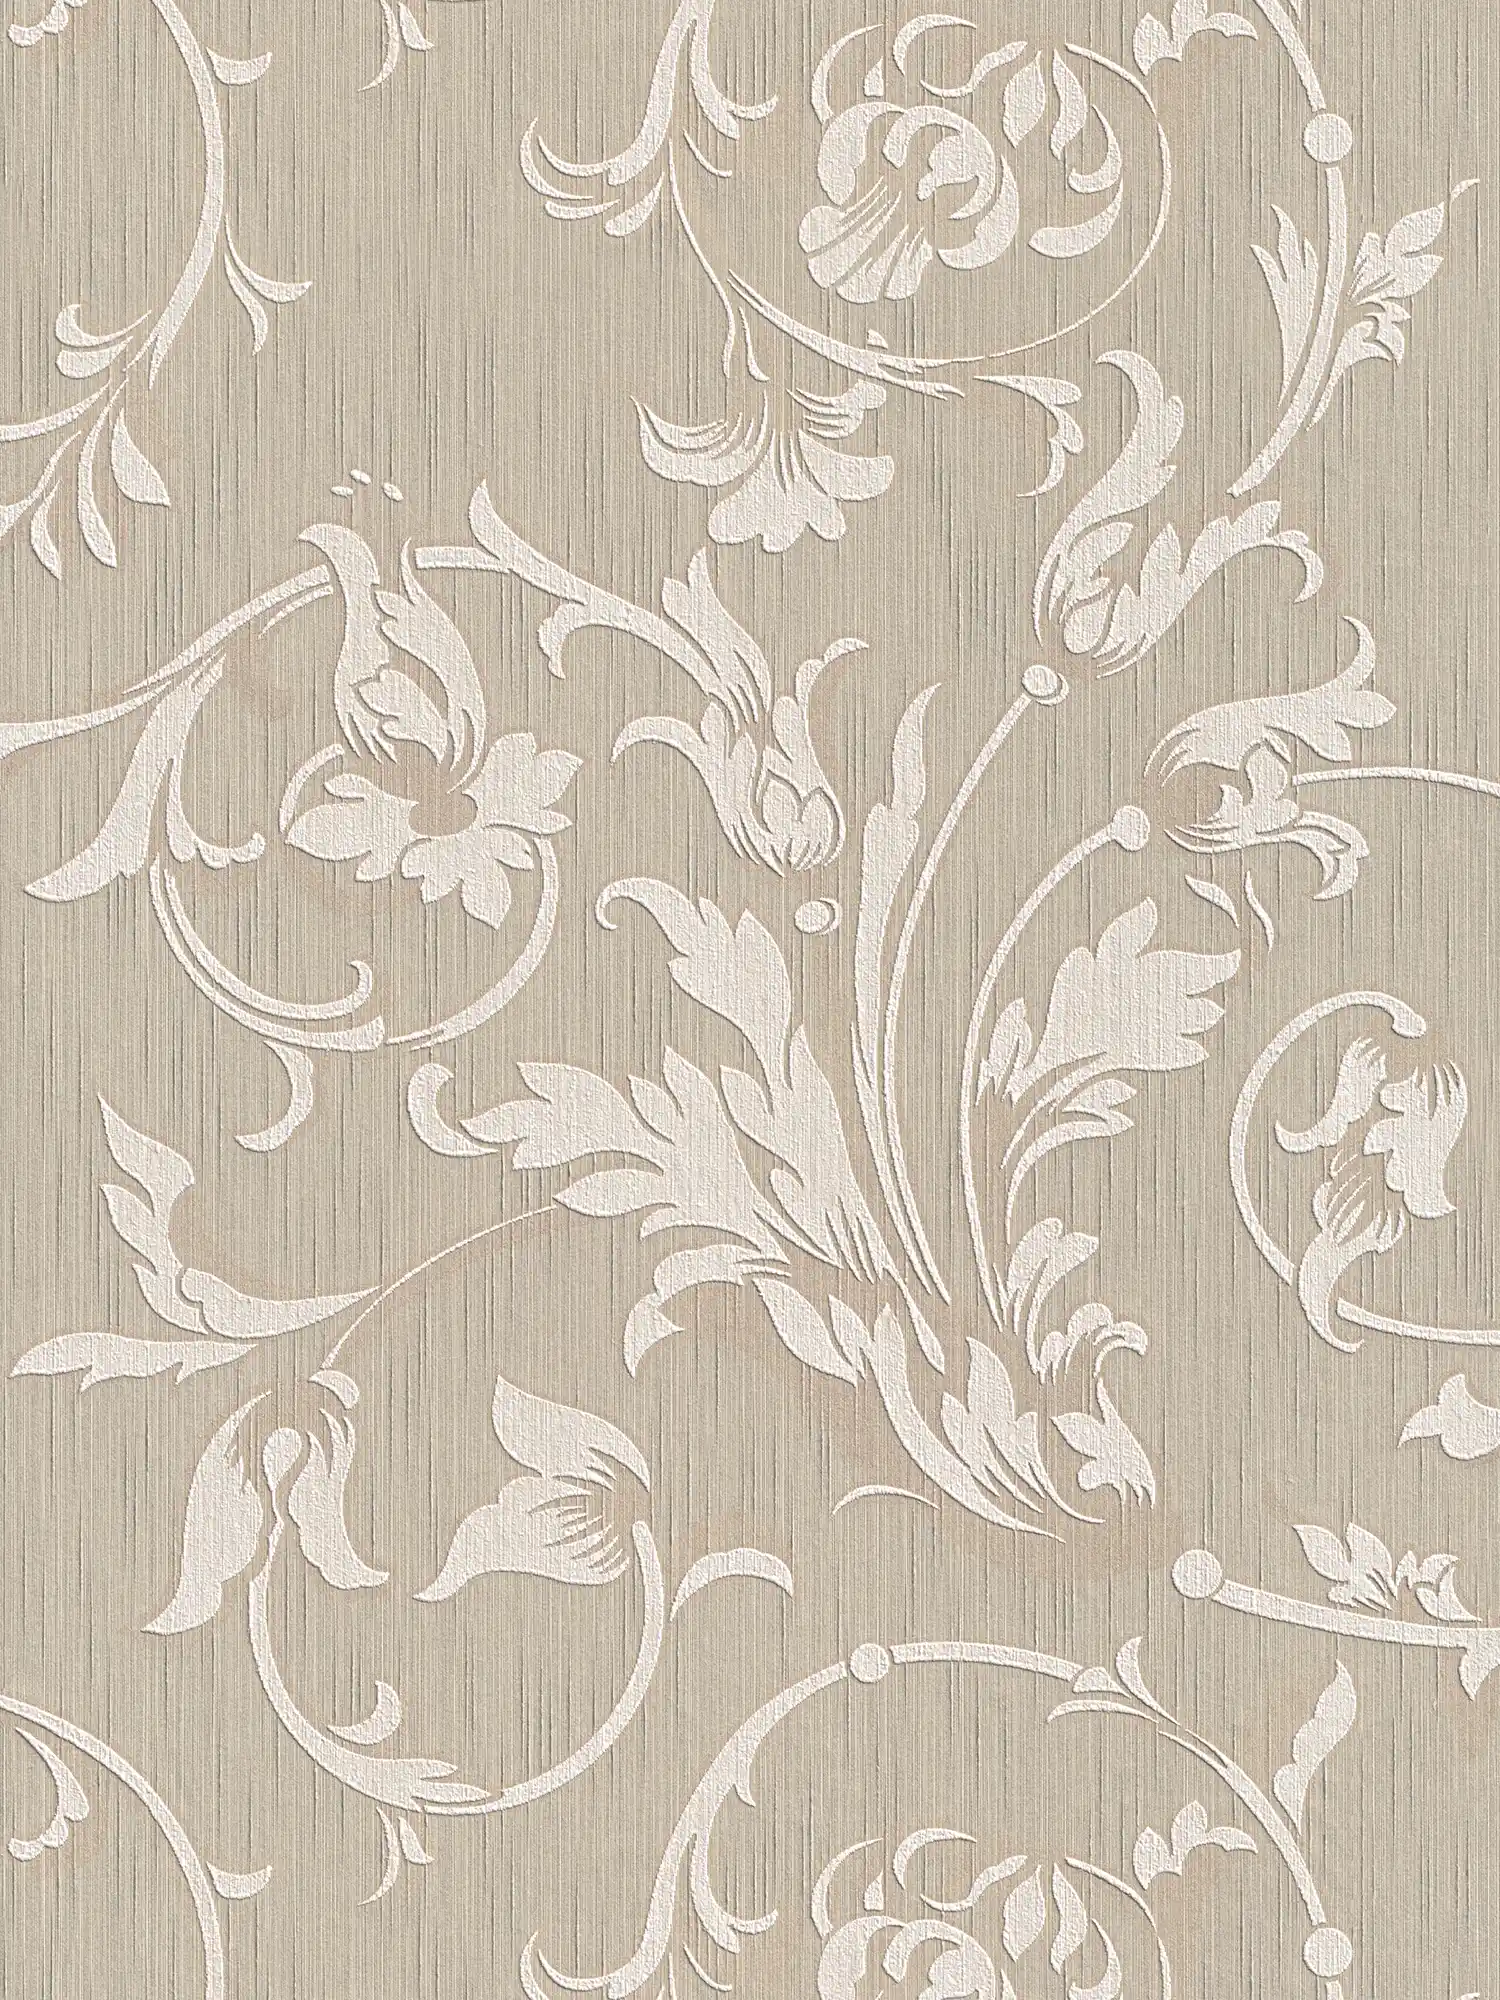 Wallpaper colonioal style with floral ornaments - beige
